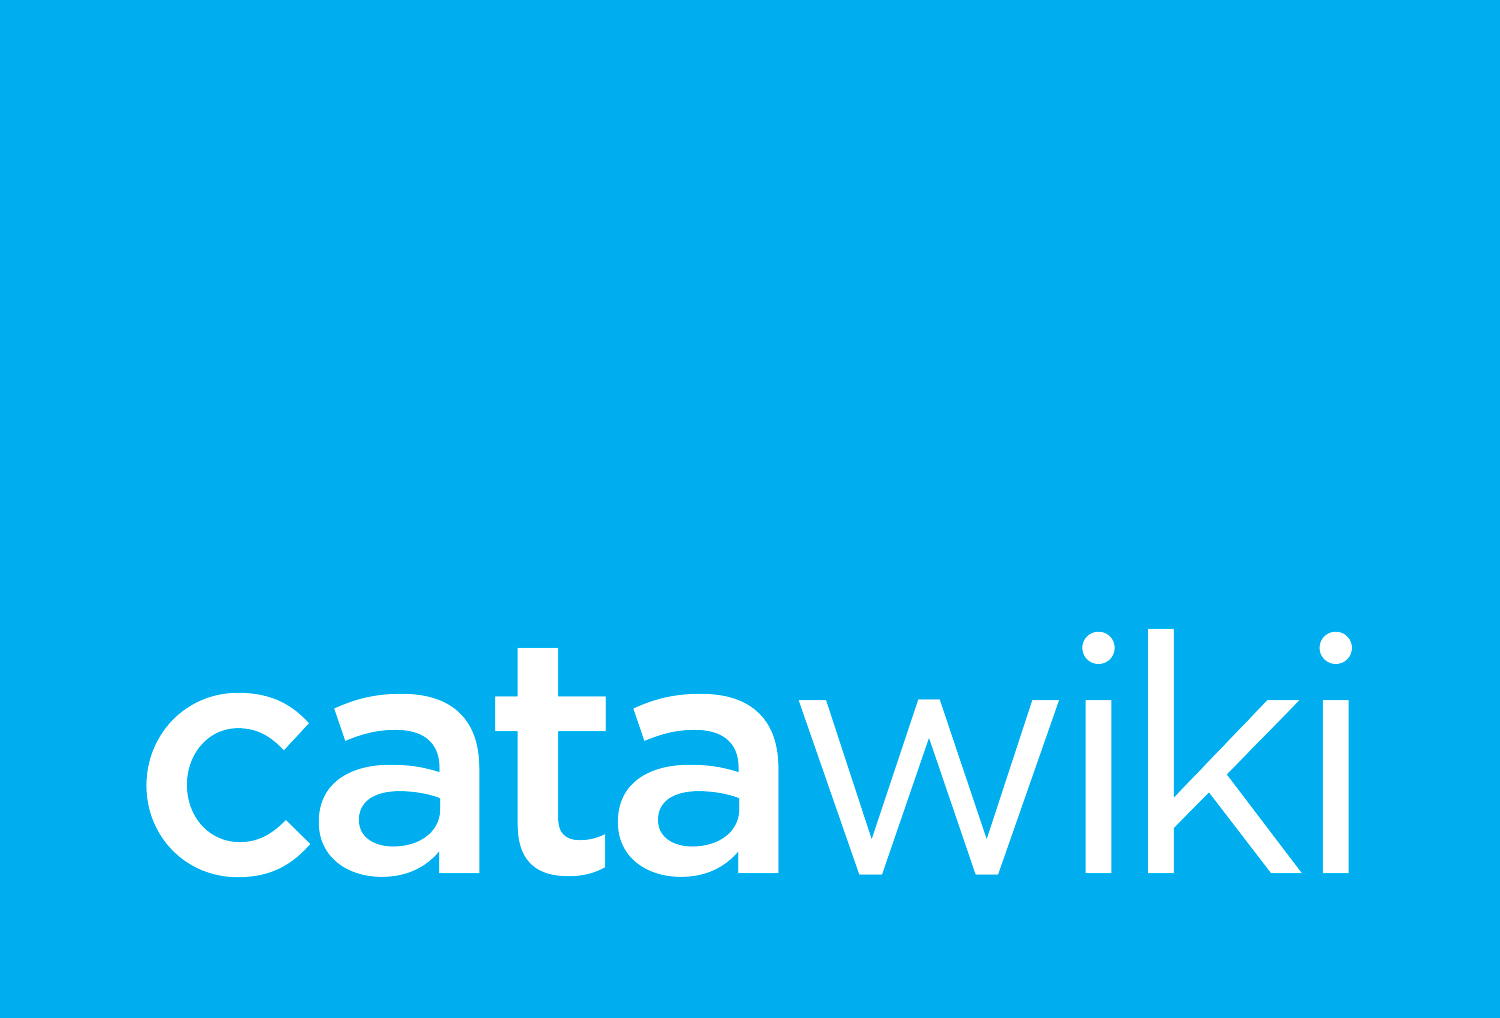 New audiction from Catawiki